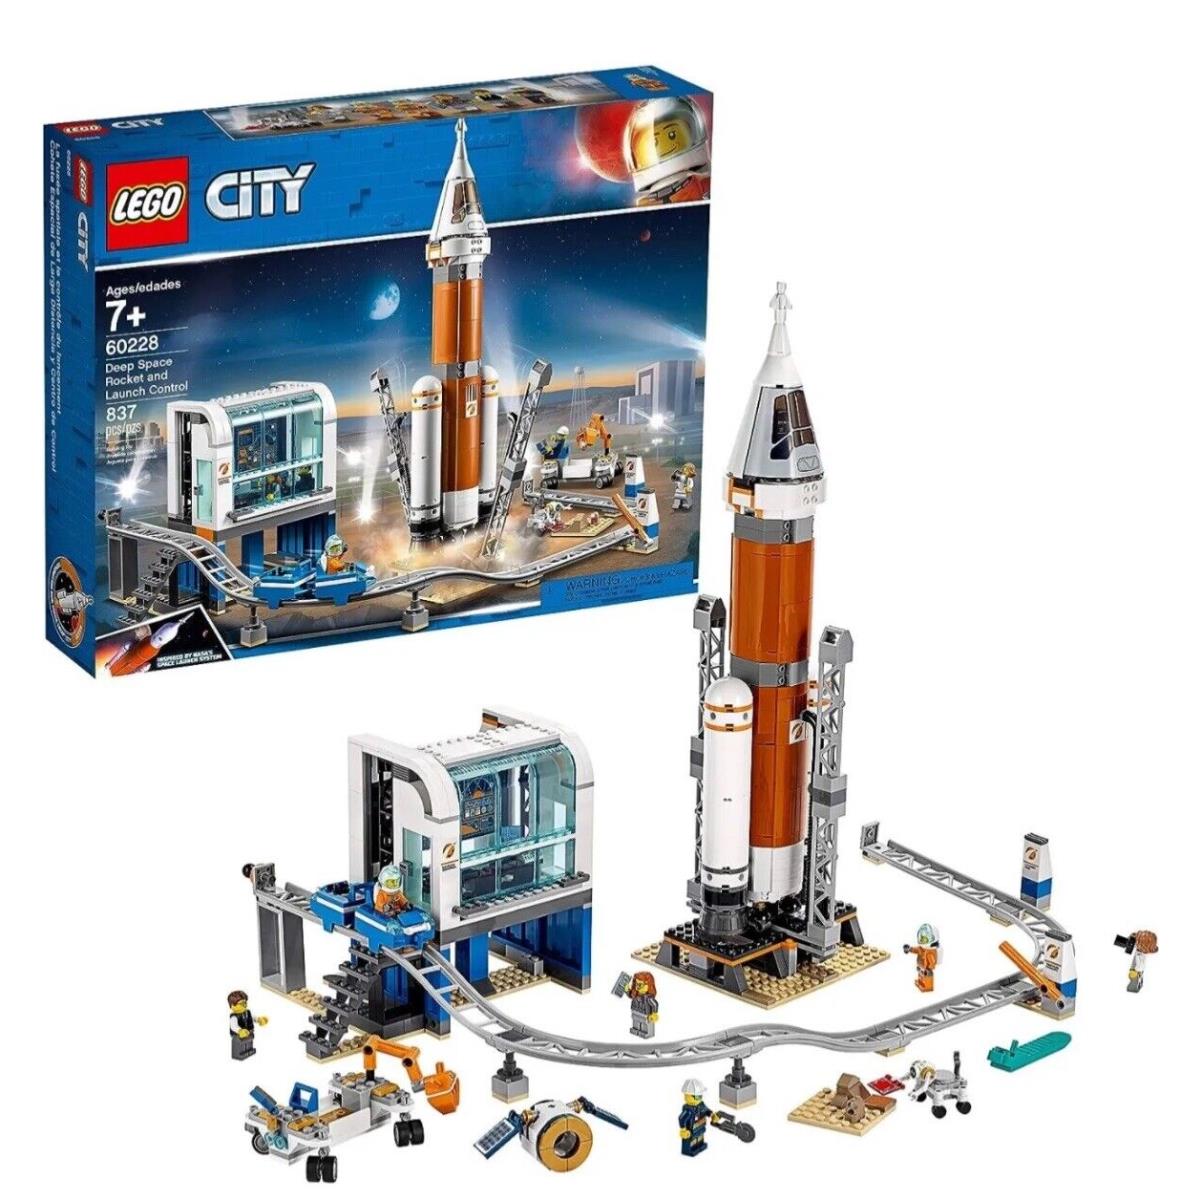 Lego City 60228 City Deep Space Rocket Launch Control . Retired